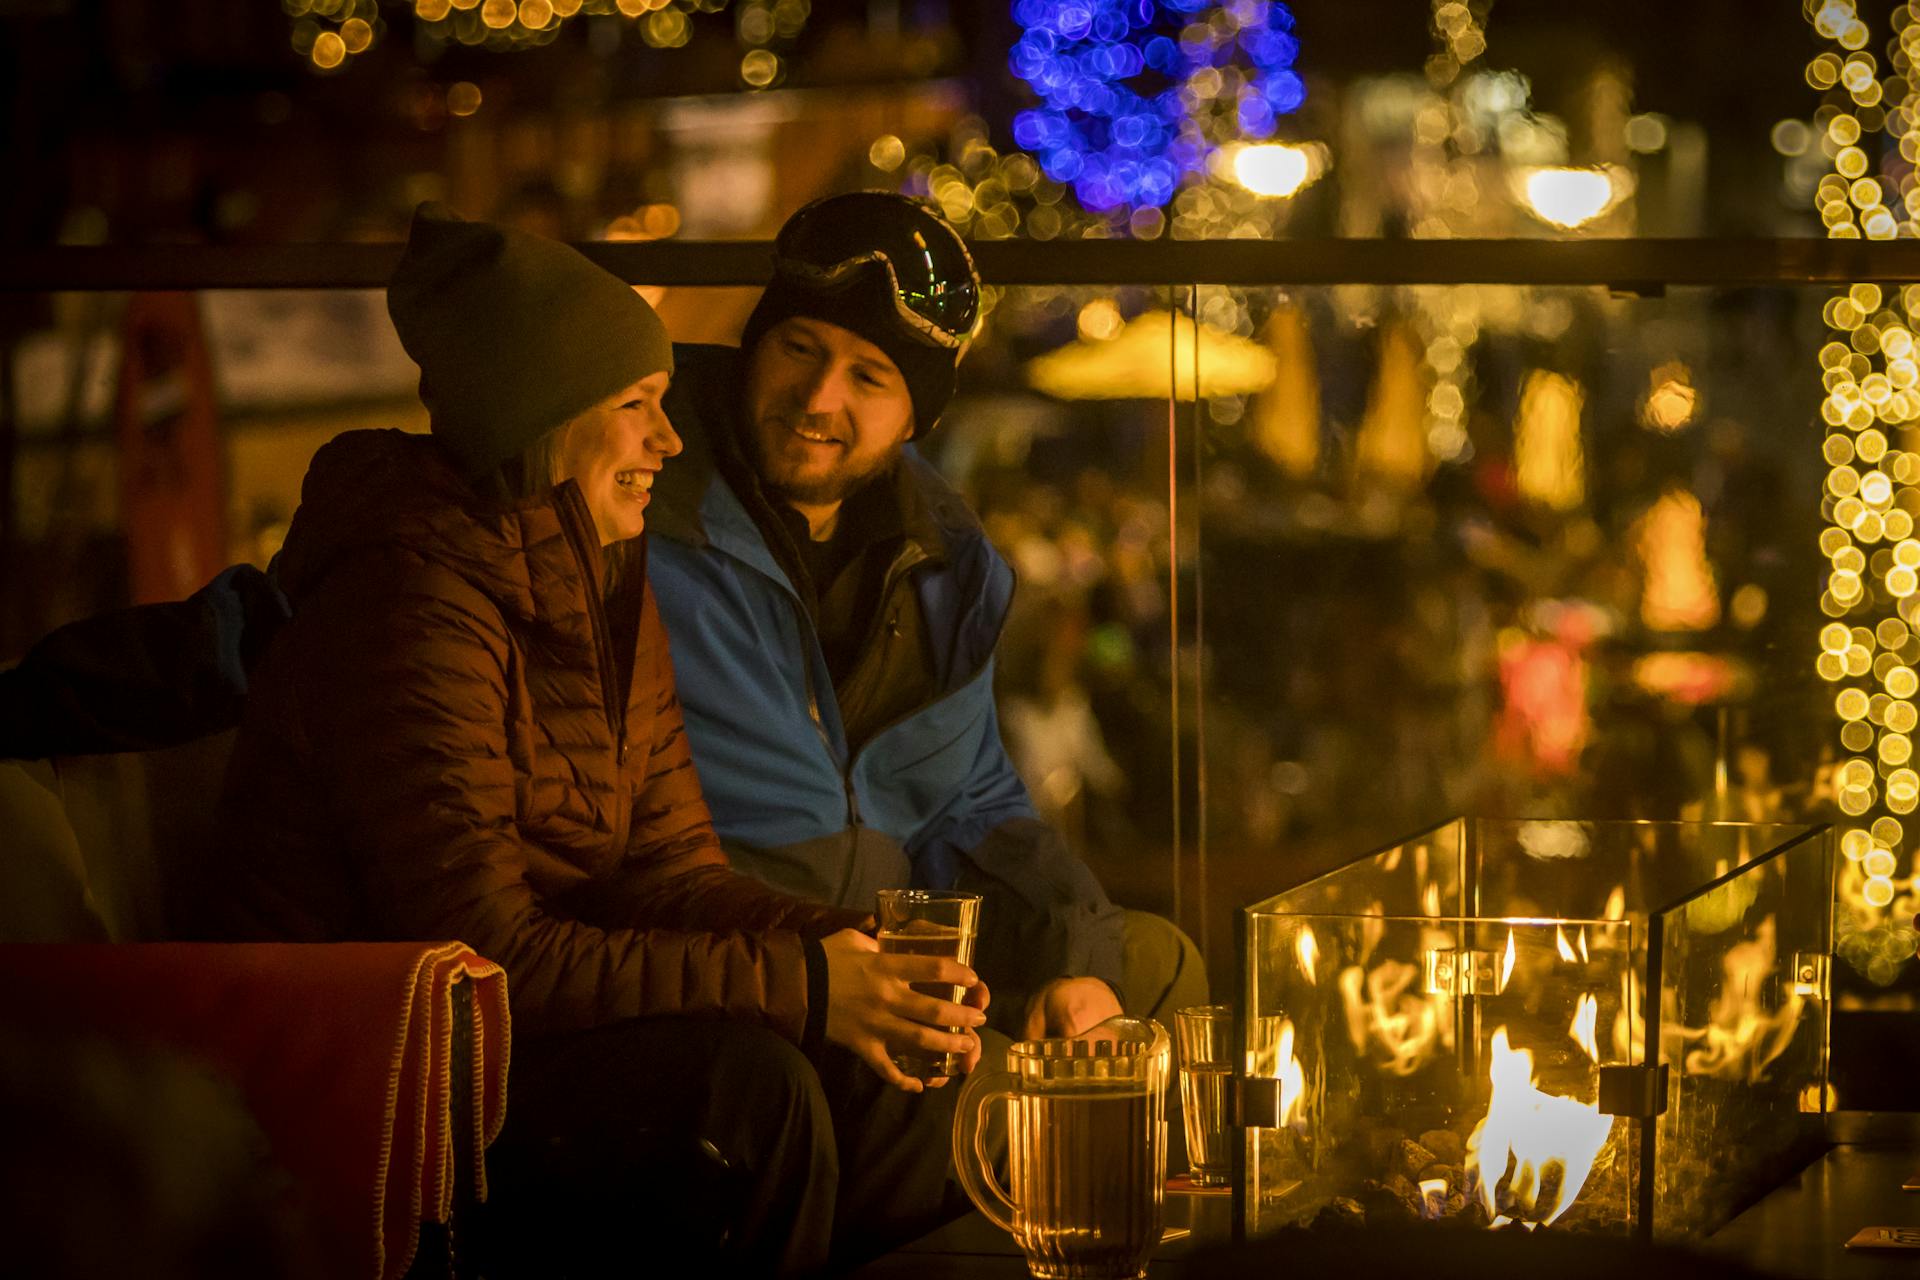 Couple having drink at apres bar by fire after skiing